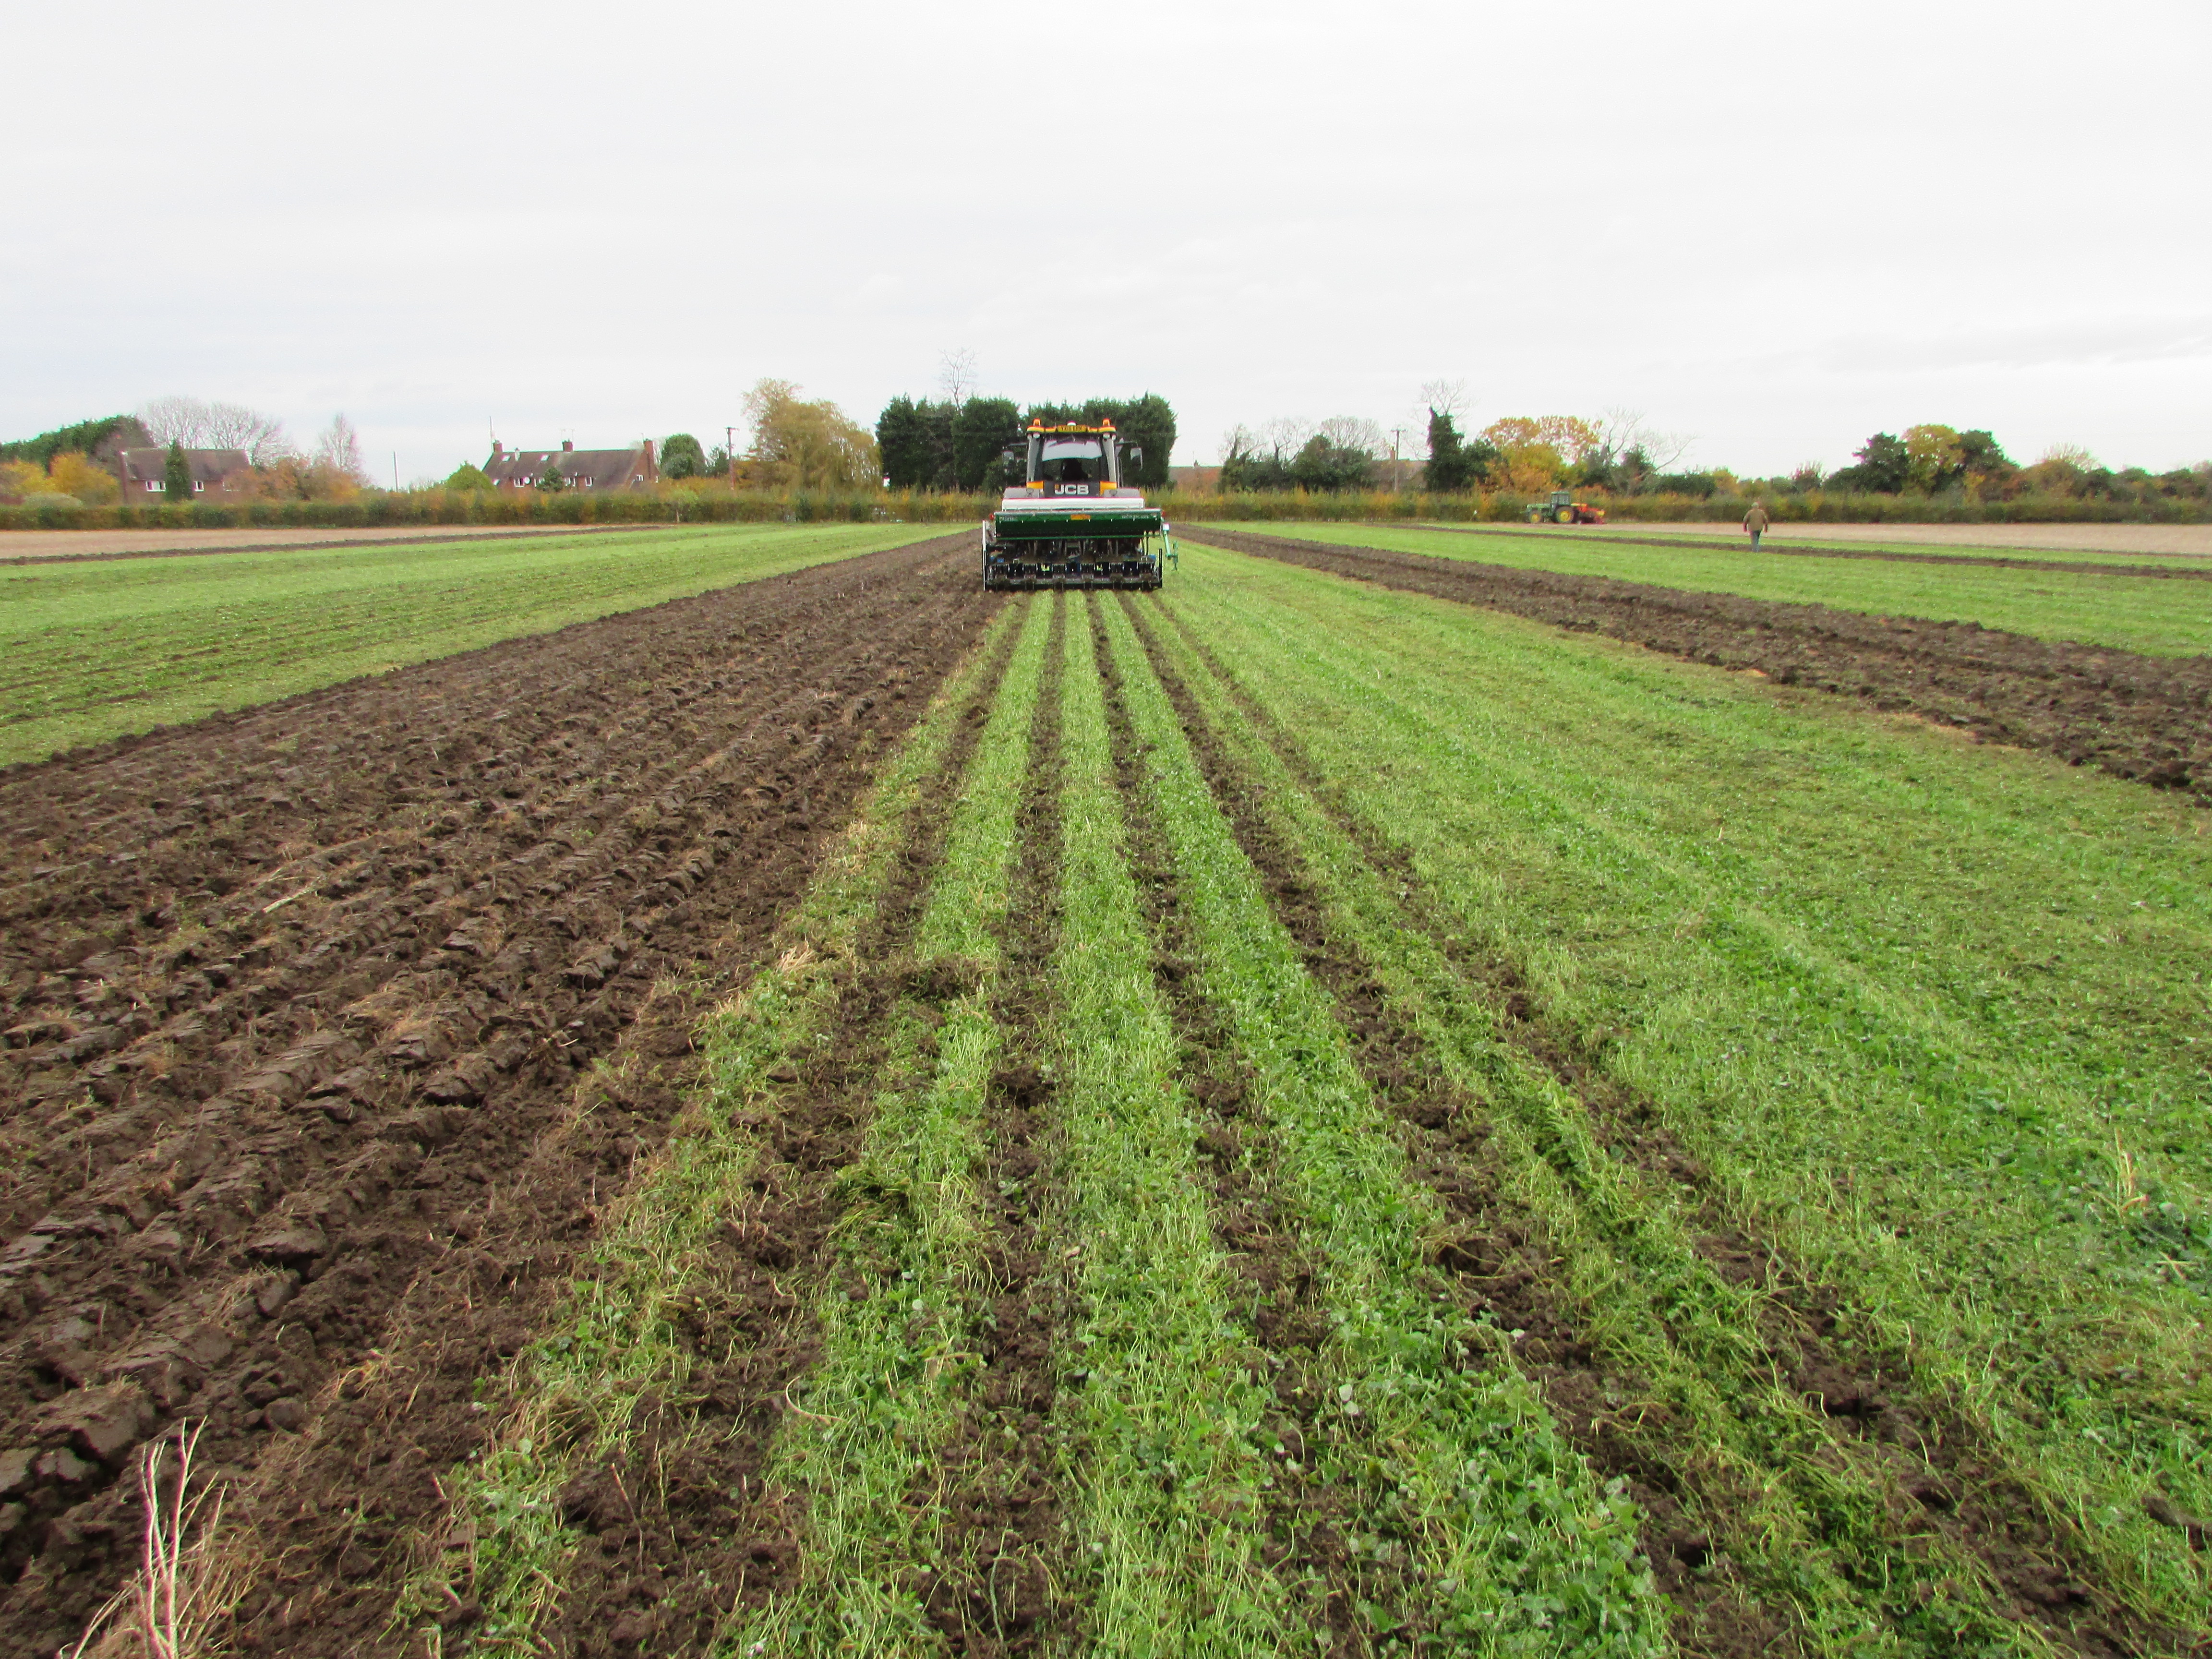 Managing mulches: the challenges of clover and climate